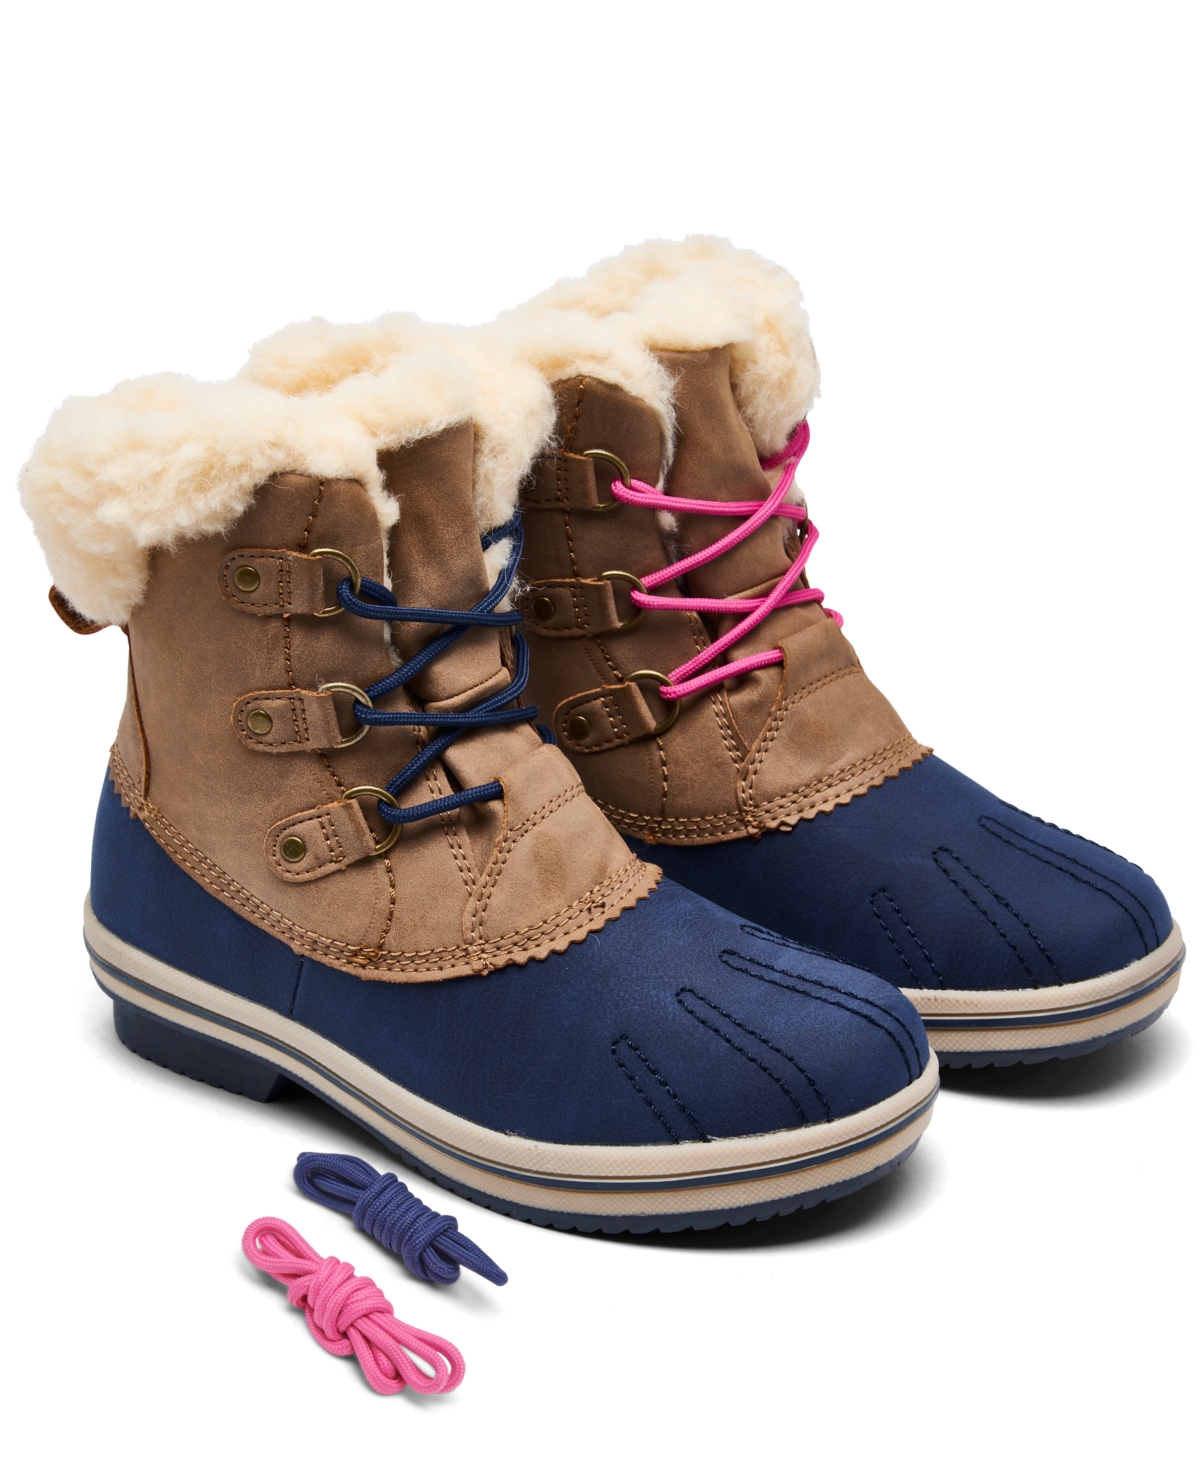 BEARPAW LITTLE GIRL'S EVERLY BOOTS FROM FINISH LINE